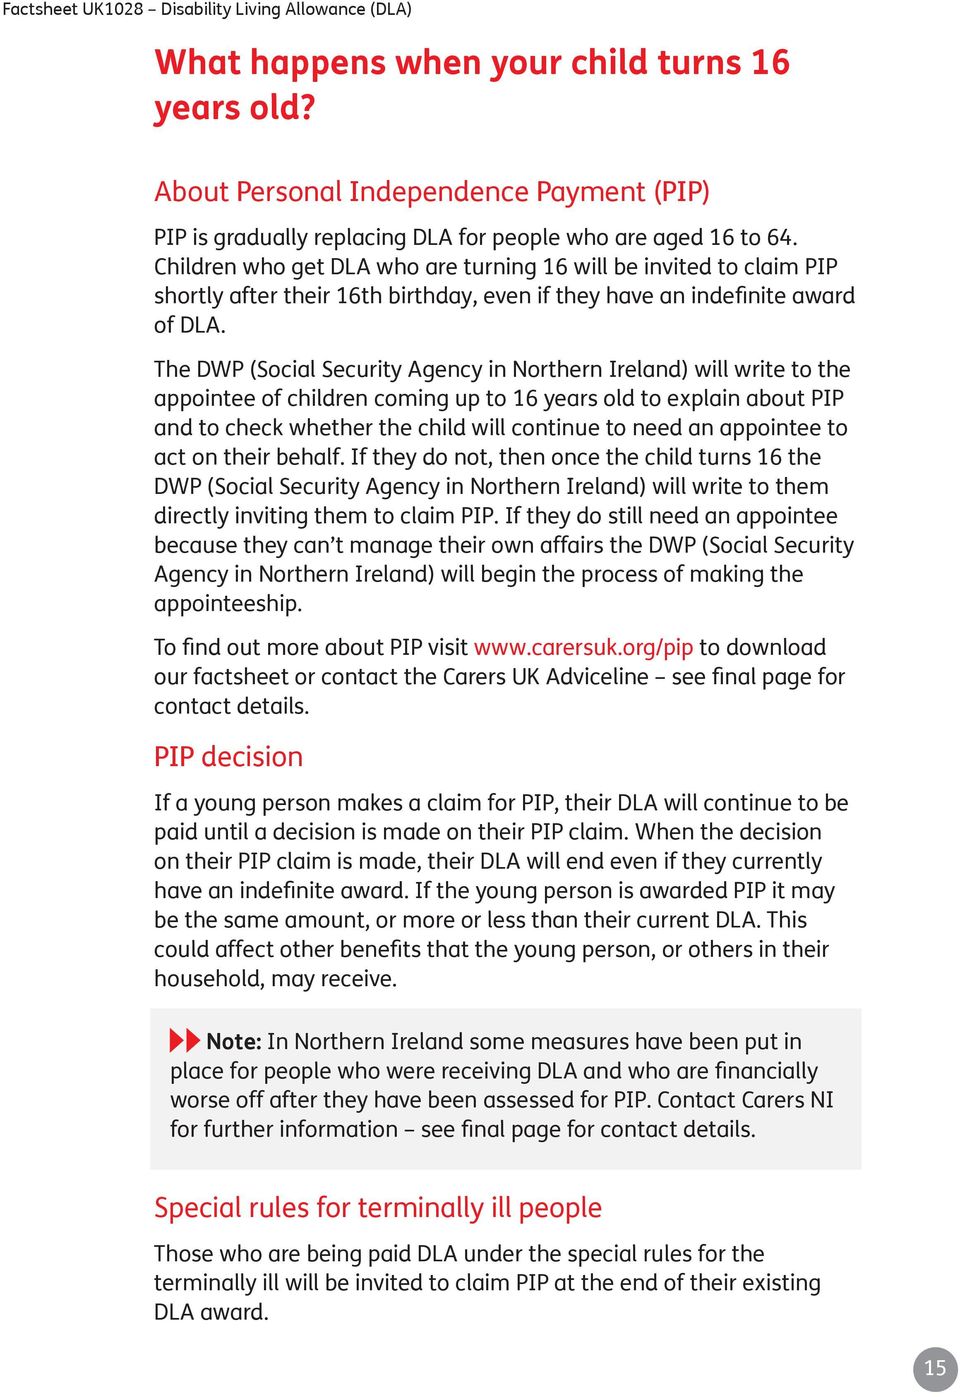 The DWP (Social Security Agency in Northern Ireland) will write to the appointee of children coming up to 16 years old to explain about PIP and to check whether the child will continue to need an